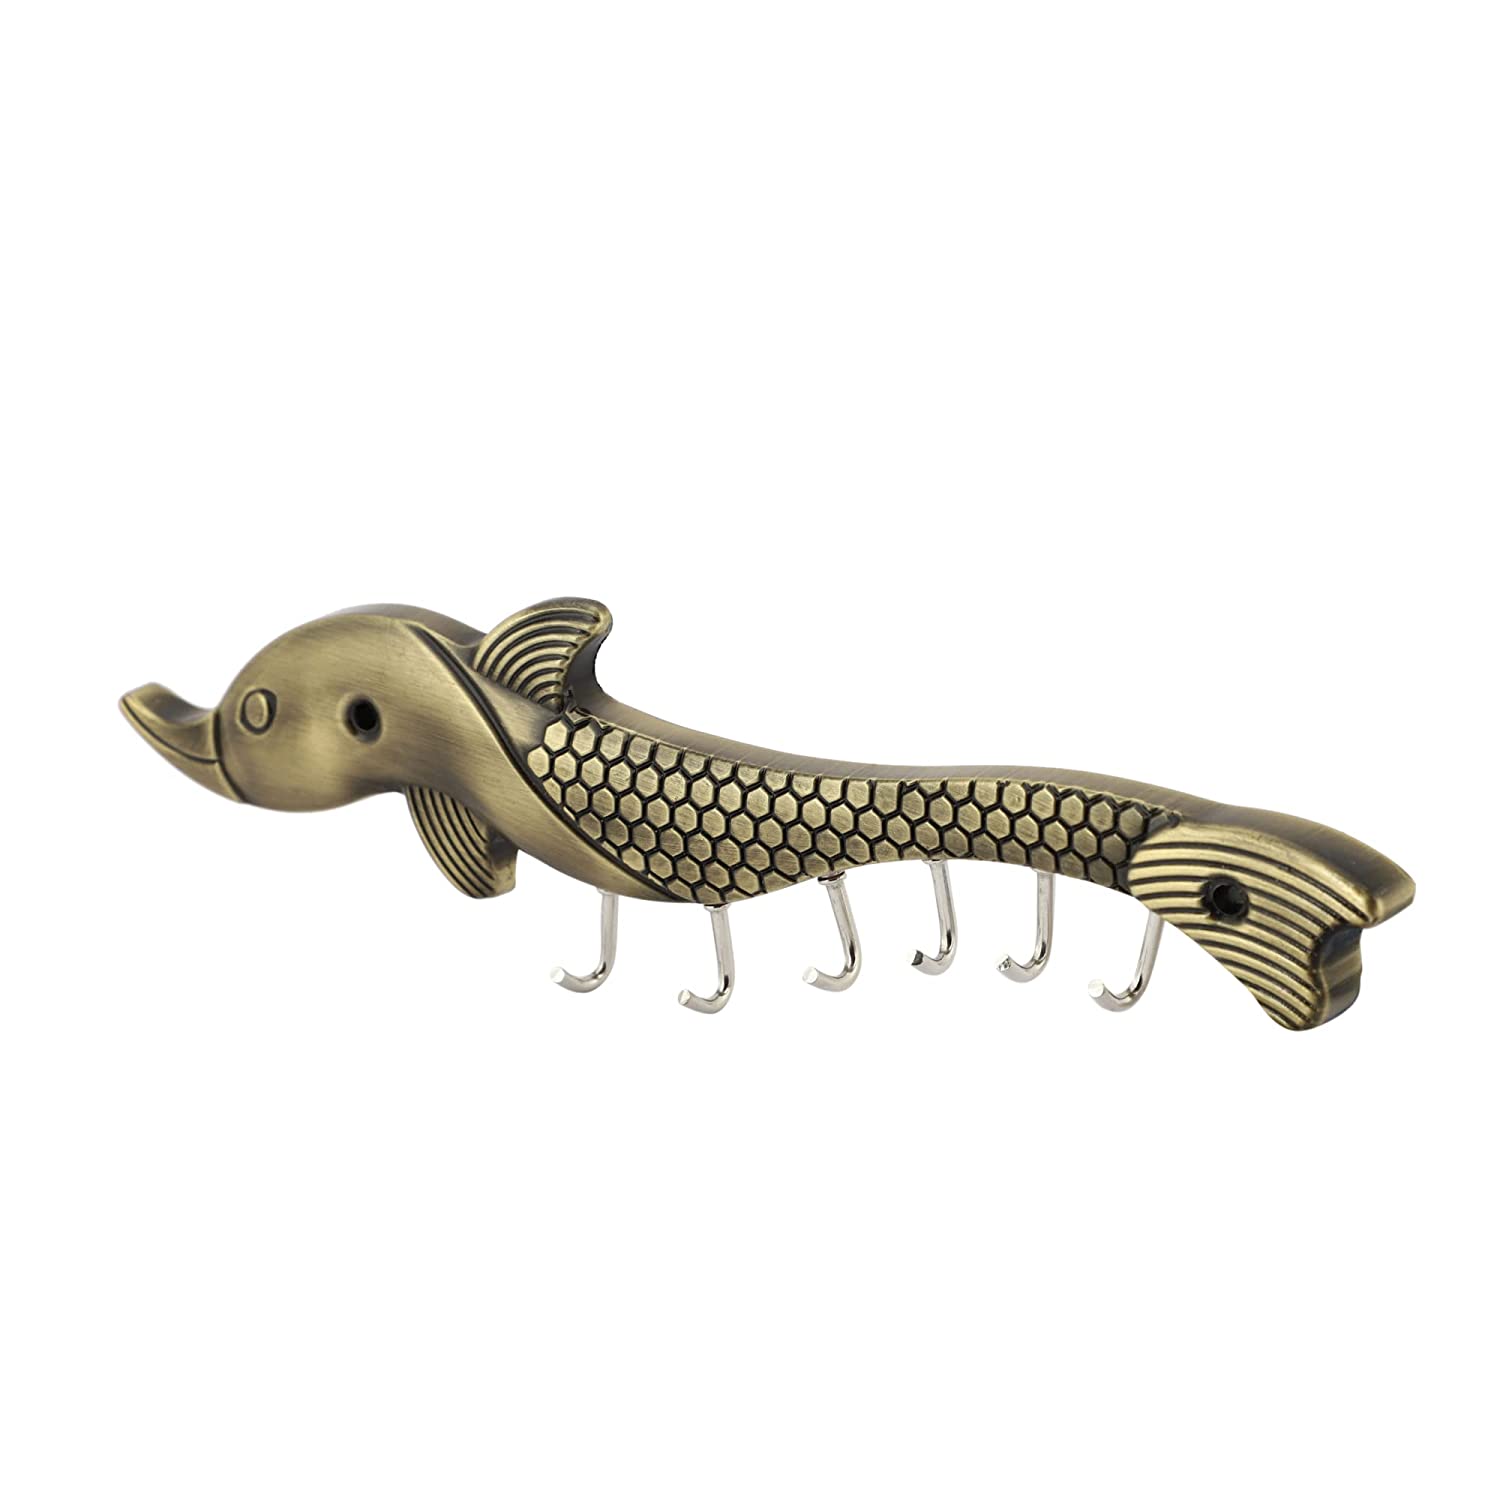 Fish Antique Key Holder for Wall - 6 Pin Key Hanging Hooks Rail Mangal Fashions | Indian Home Decor and Craft